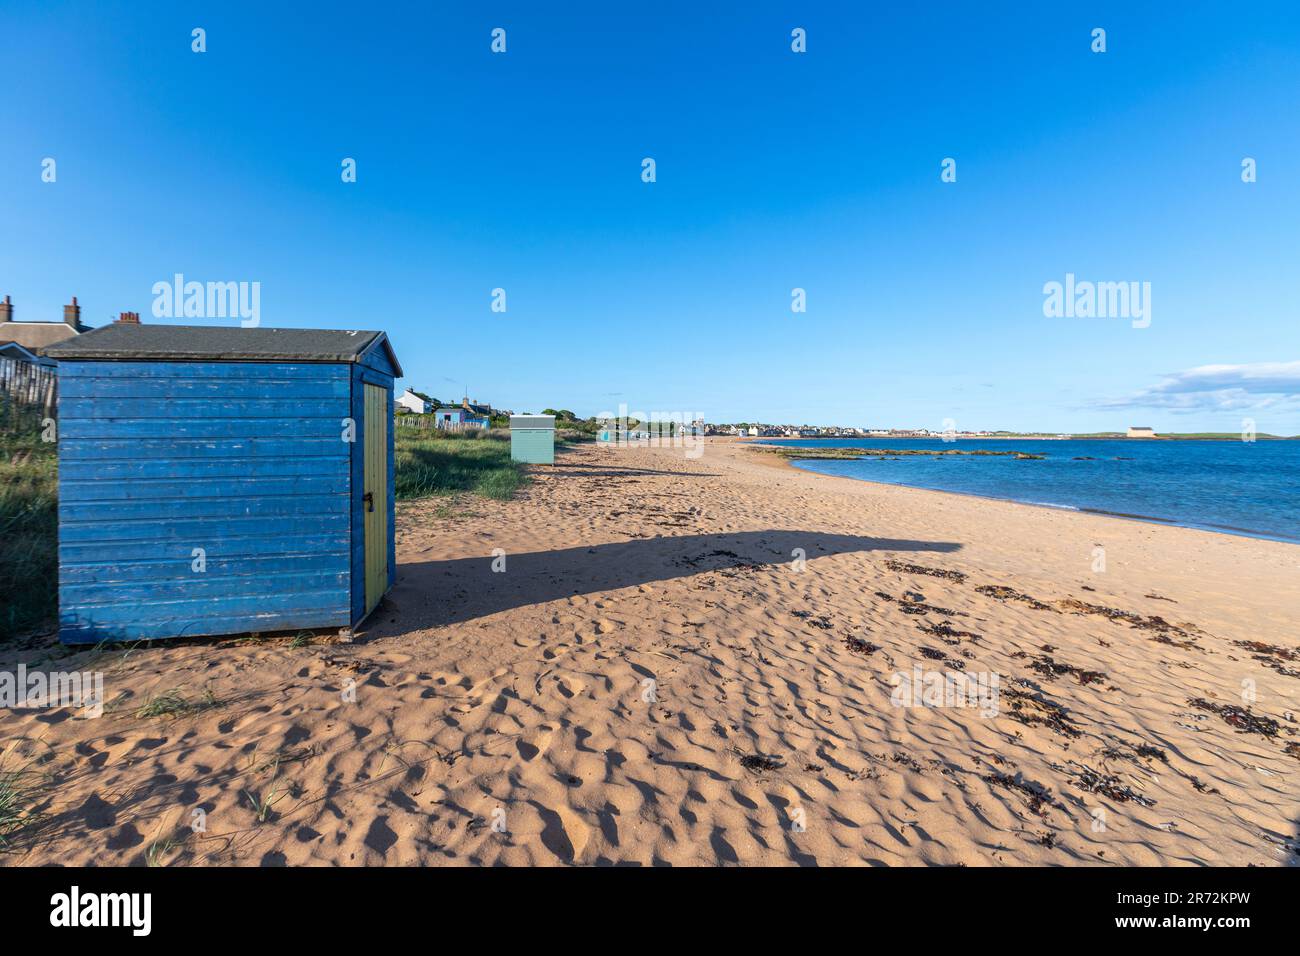 Beach huts for changing clothes in Earlsferry Beach, Elie and ...